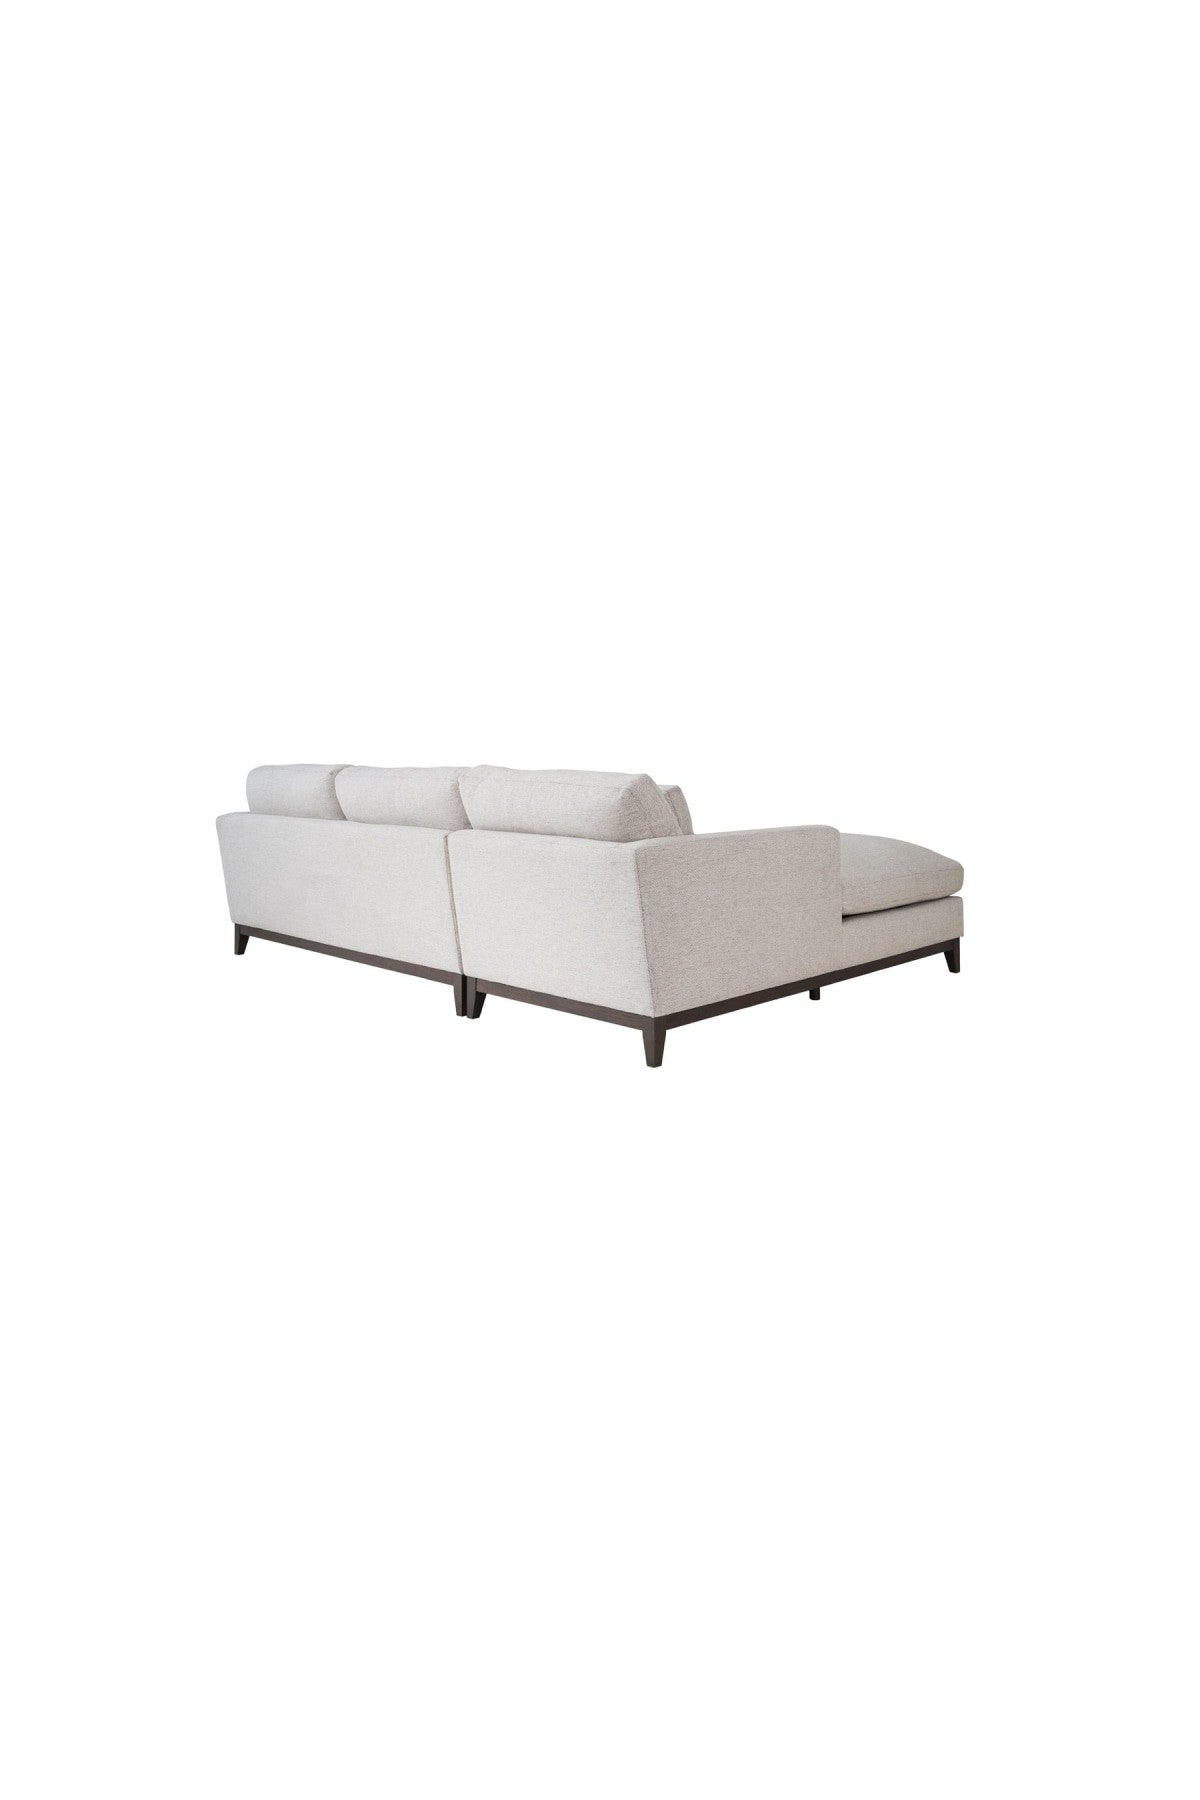 Stanford Sectional Sofa